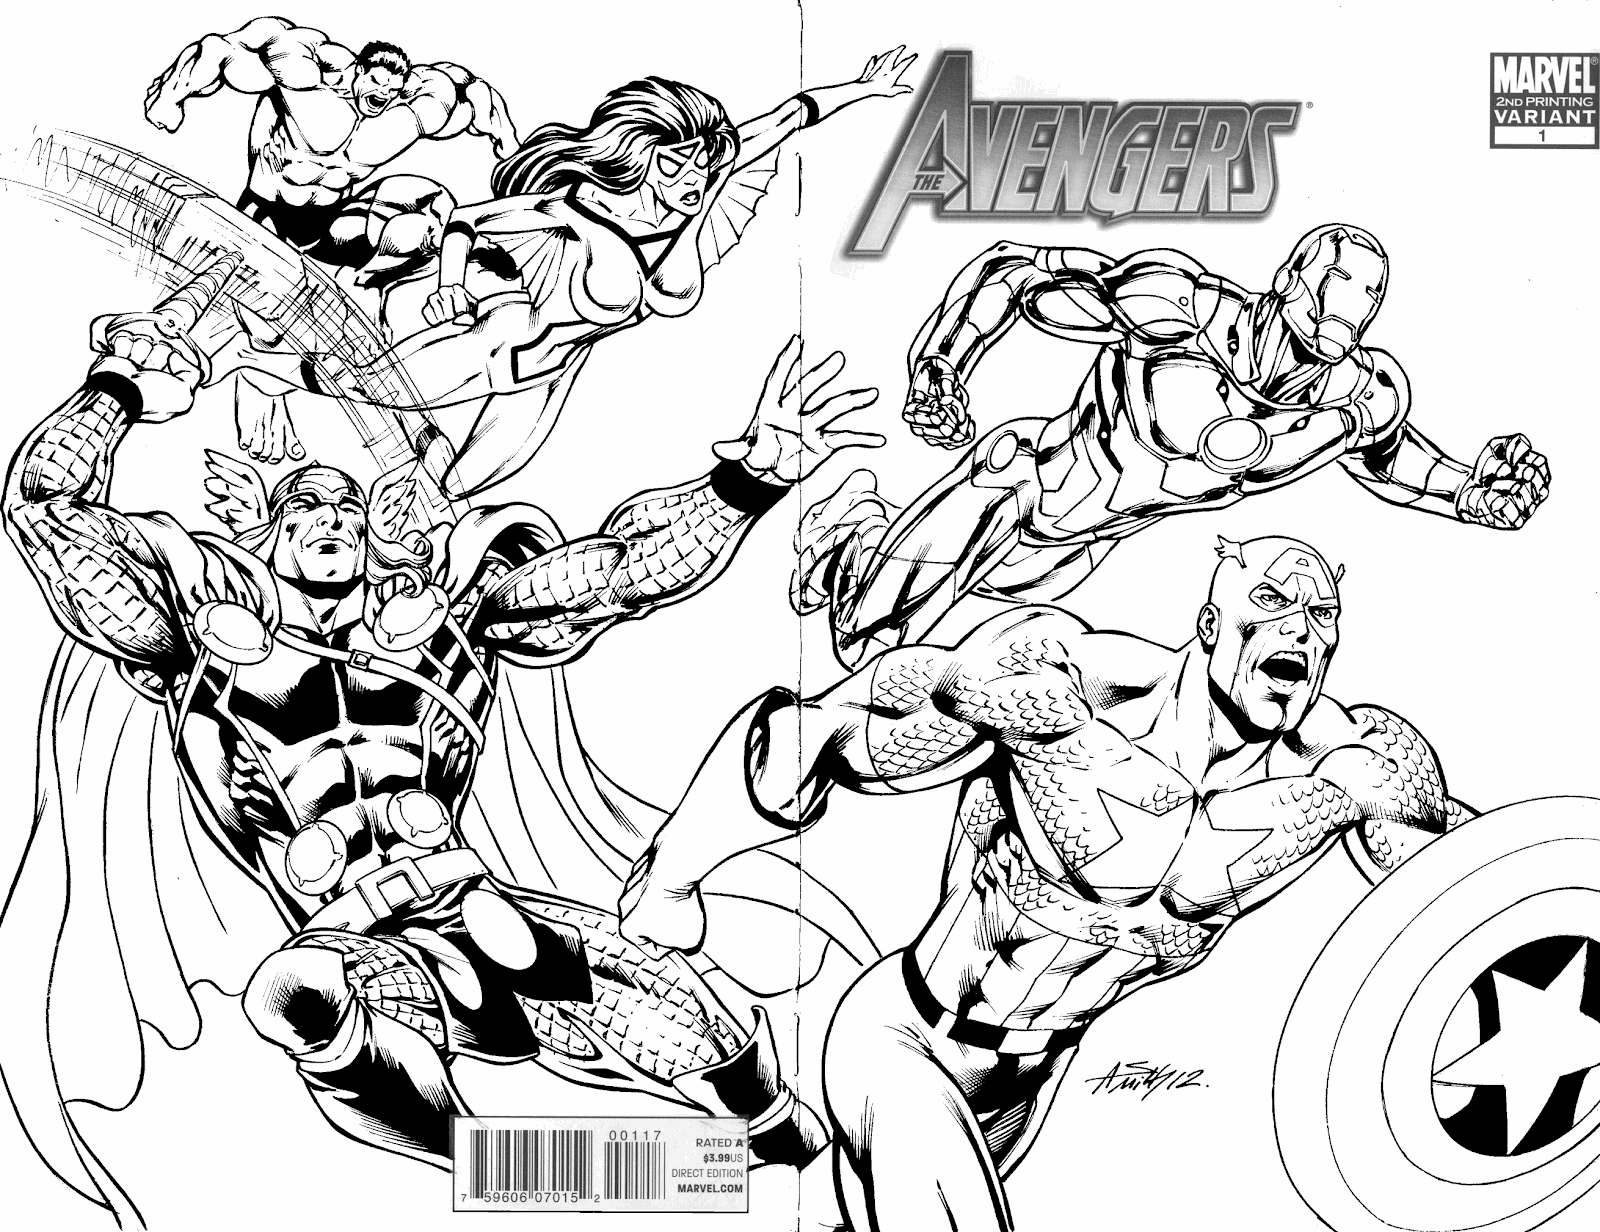 Marvel Superheroes Avengers in Action Coloring Page for